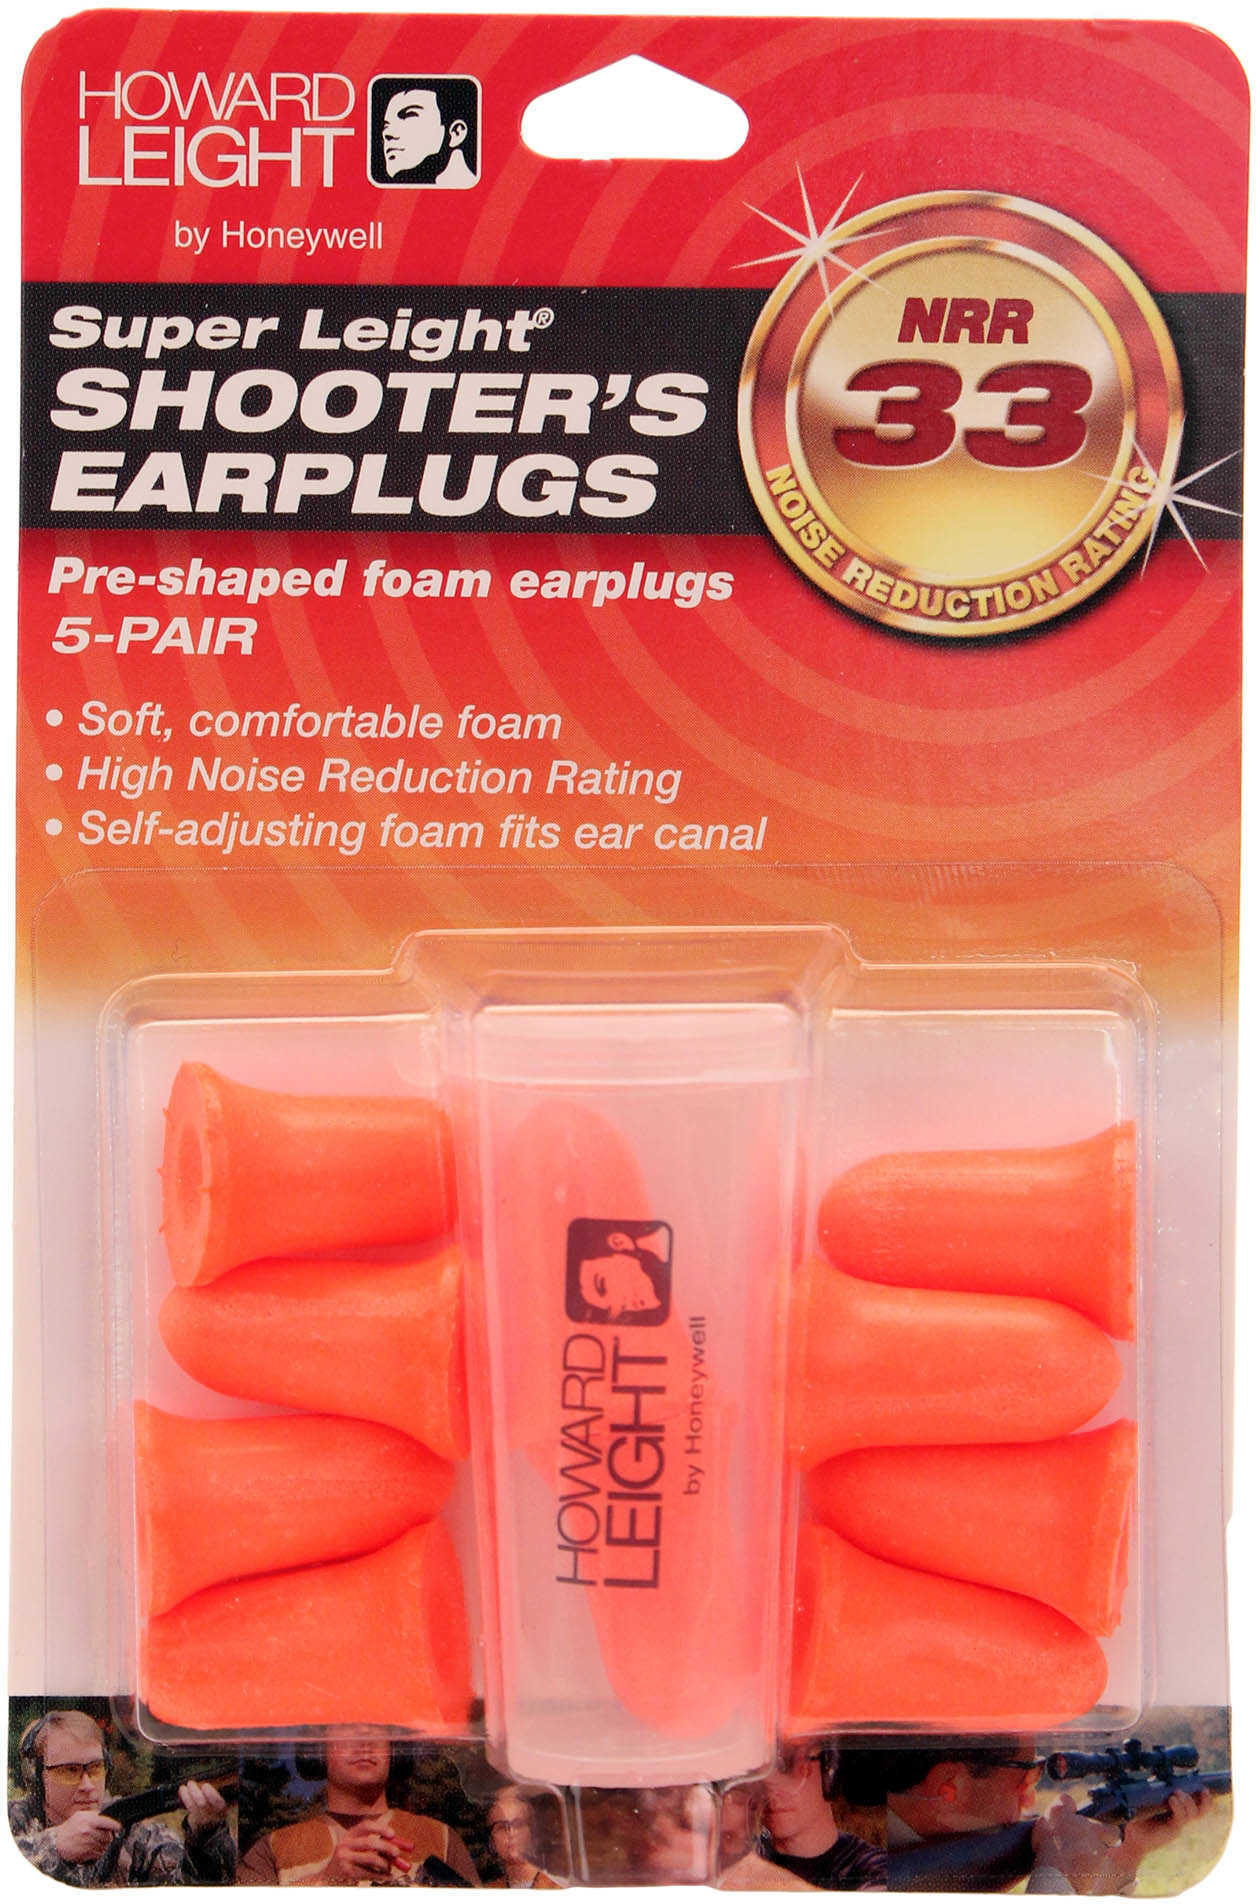 Howard Leight Industries Super Uncorded Disposable Earplugs NRR 33 - 5 Pairs a Blister Pack With Case Highest